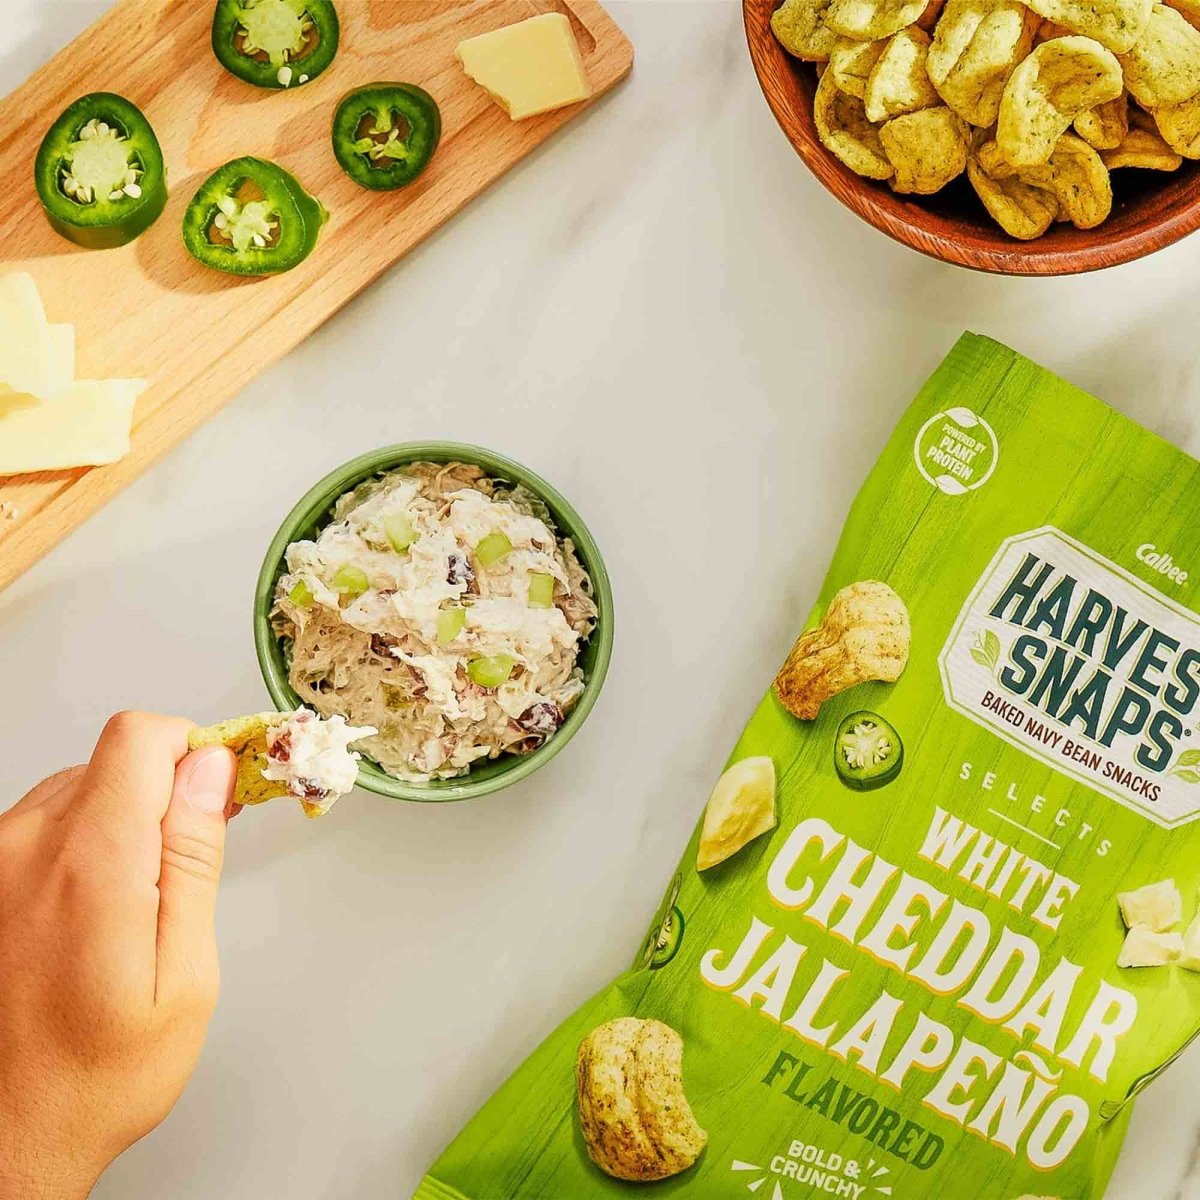 Selects White Cheddar Jalapeno - Calbee Harvest Snaps